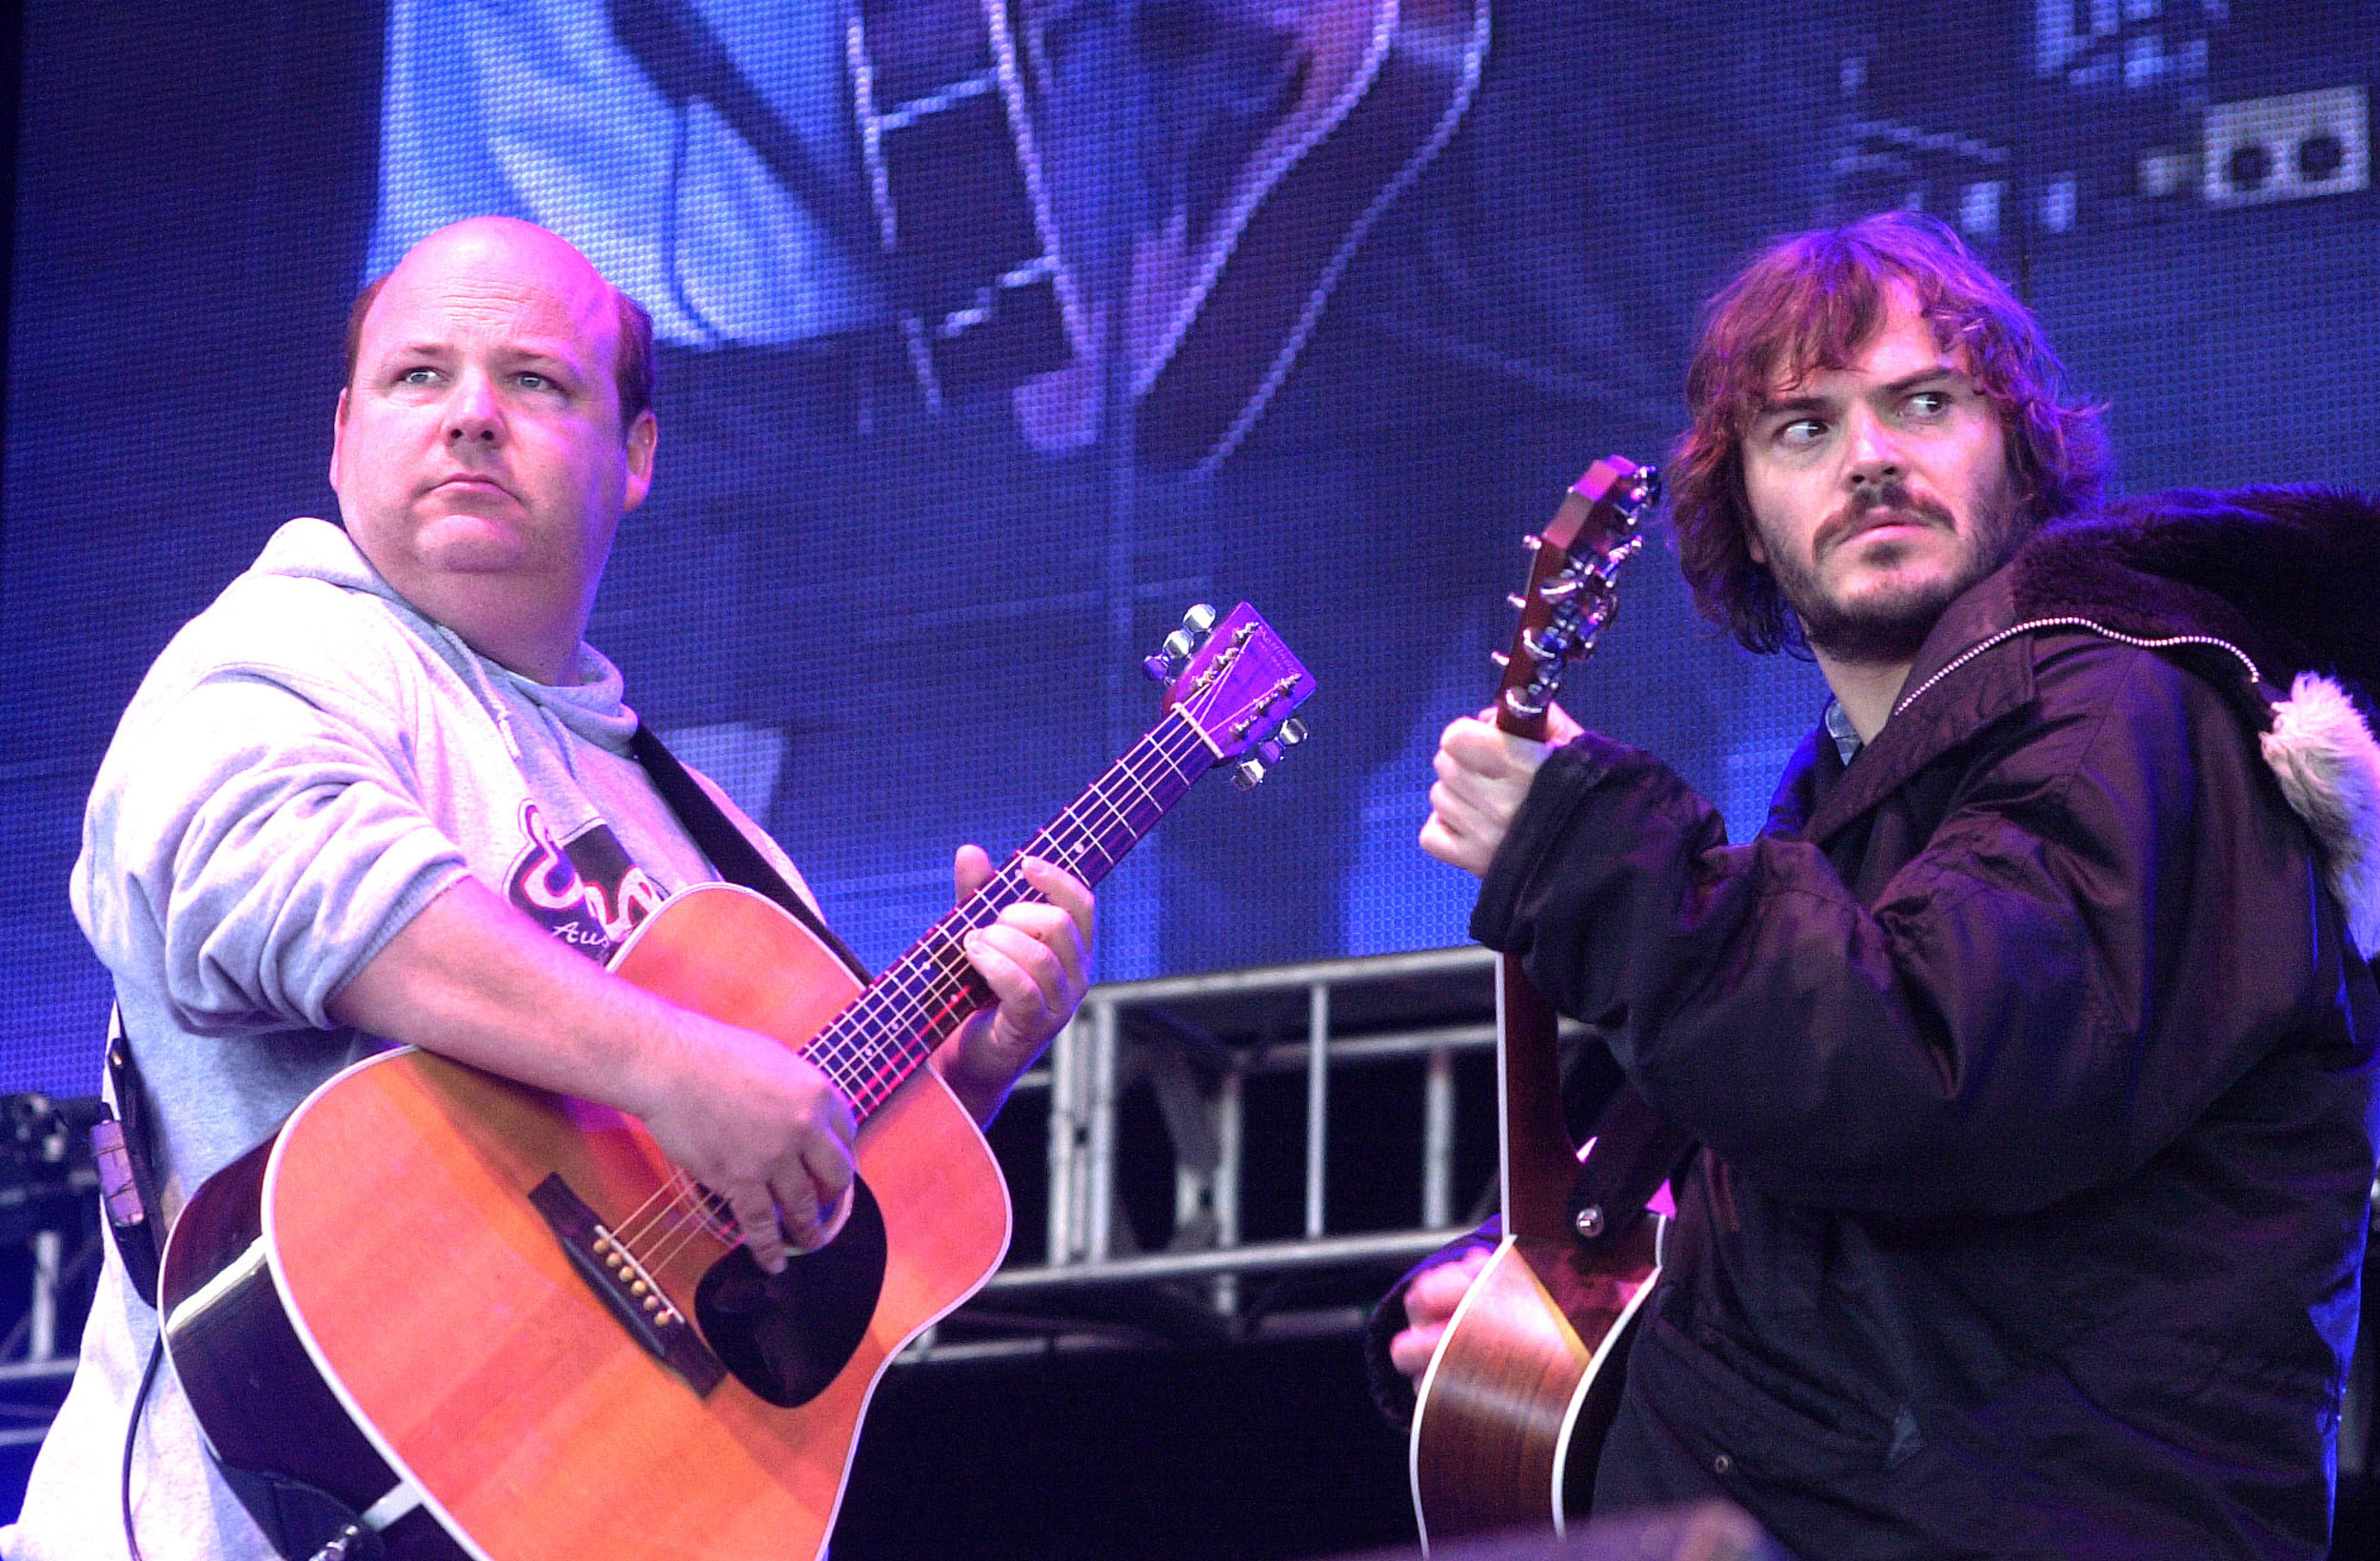 <p>There was a time and a place for Tenacious D. Initially a side project with a cult-like following before Jack Black became an in-demand Hollywood property, Tenacious D put out its first true-and-proper studio album in 2001, and it was crass, obvious — and remarkably fun. While songs like "Tribute" and "Wonderboy" are somewhat one-joke wonders, they're elevated by The Dust Brothers' (Beastie Boys, Beck) clever production, as sweeping strings during the hilarious "F*** Her Gently" give the absurdity of the lyric that extra push it needs to land the joke. The interludes felt improvised but wisely curated, like a shambling of fragments that coalesced into a greater sonic whole. After that? "The Pick of Destiny" is a pretty mainstream stoner movie classic, but even D fans note how that soundtrack simply wasn't as explosive as the debut. Each new record since then, usually tied into a project or series or whatnot, has shown diminishing returns, as the times have changed but the humor has not. It's a bit disappointing, but for all the "don't quit your day job" jokes that could be made at Black's expense, there's at least one example of him absolutely nailing this comedy-song thing.</p><p>You may also like: <a href='https://www.yardbarker.com/entertainment/articles/steal_the_show_tv_supporting_characters_who_took_the_lead_012324/s1__39312634'>Steal the show: TV supporting characters who took the lead</a></p>